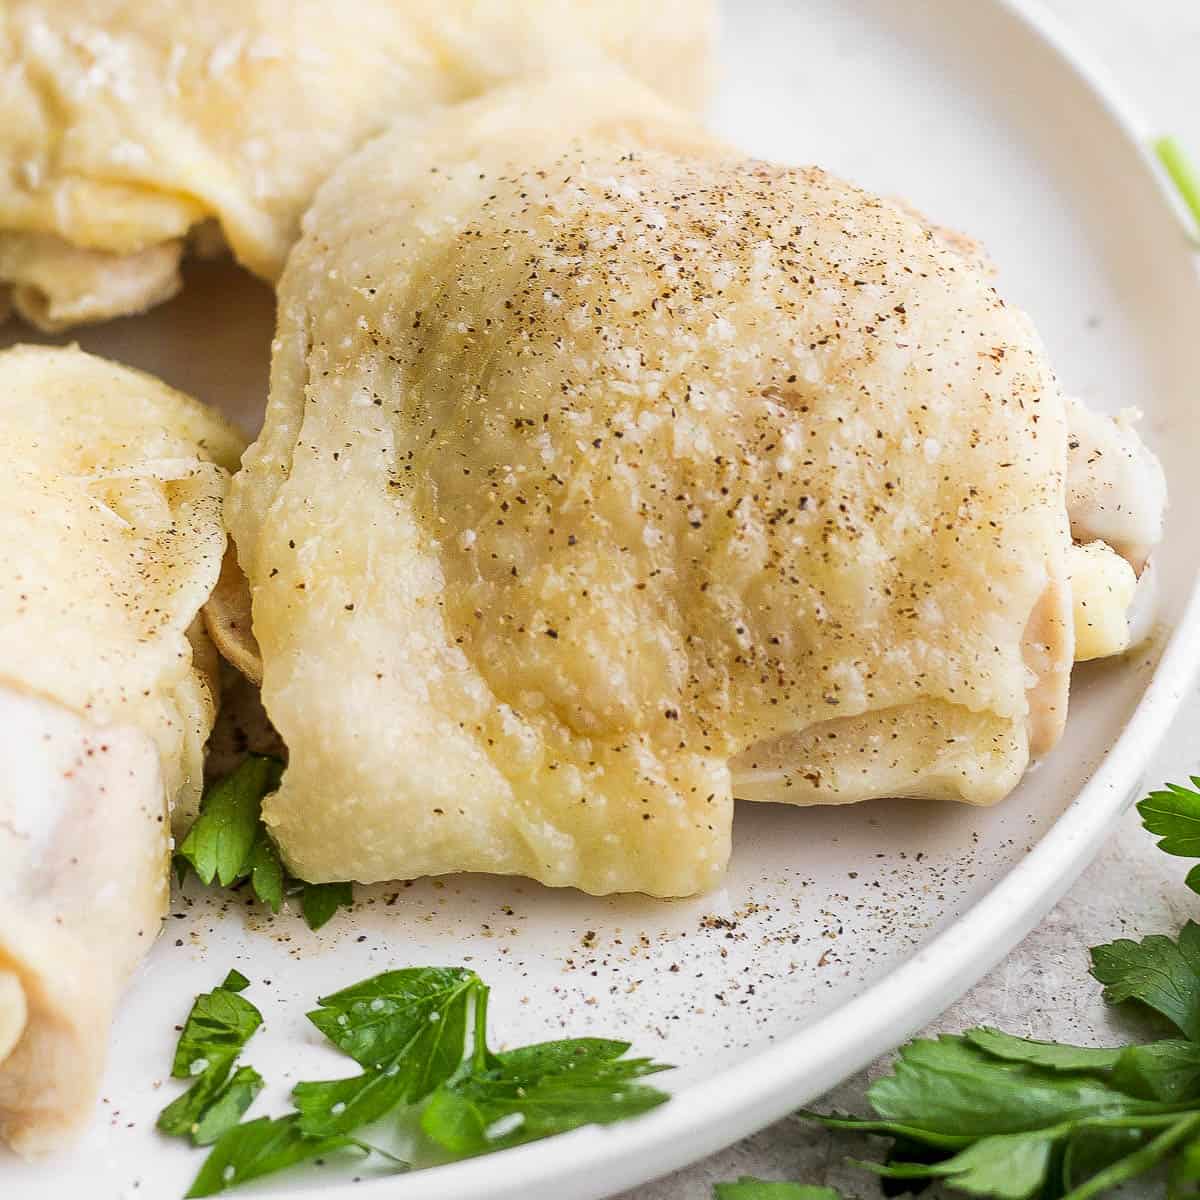 How Long Does It Take to Boil Chicken Thighs?